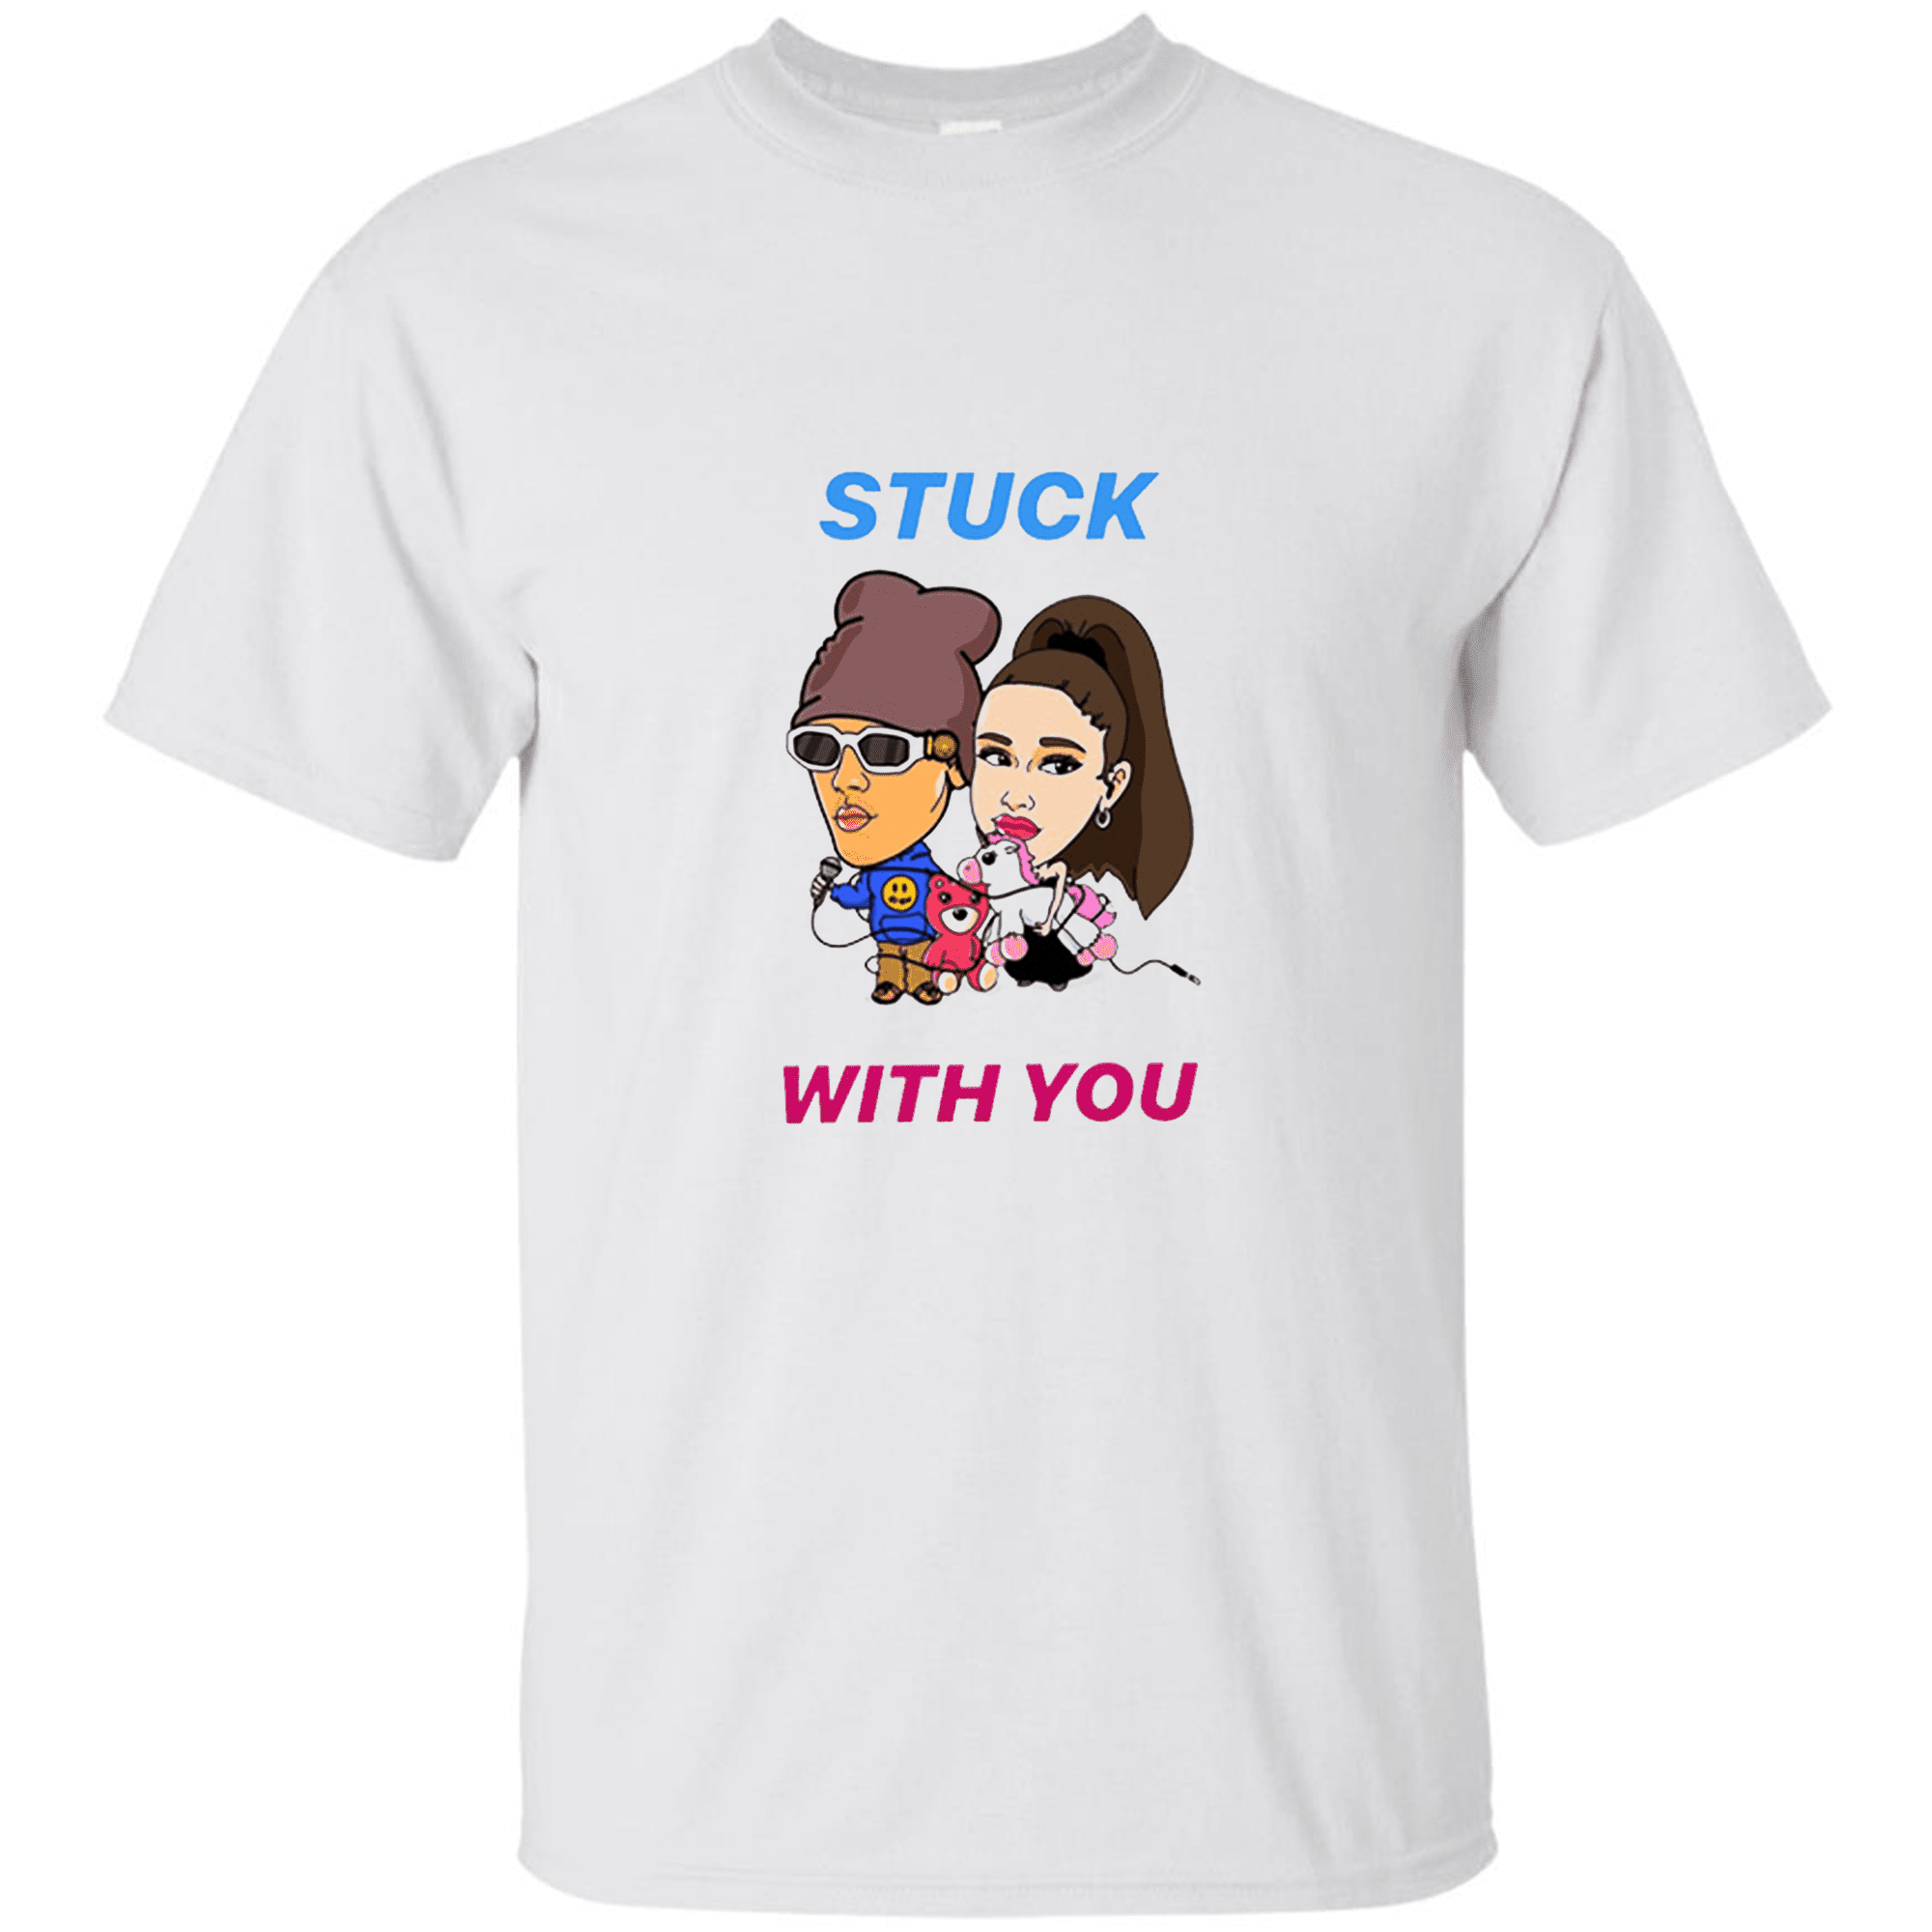 Stuck With U Ariana Grande And Justin Bieber T Shirt By Clothenvy